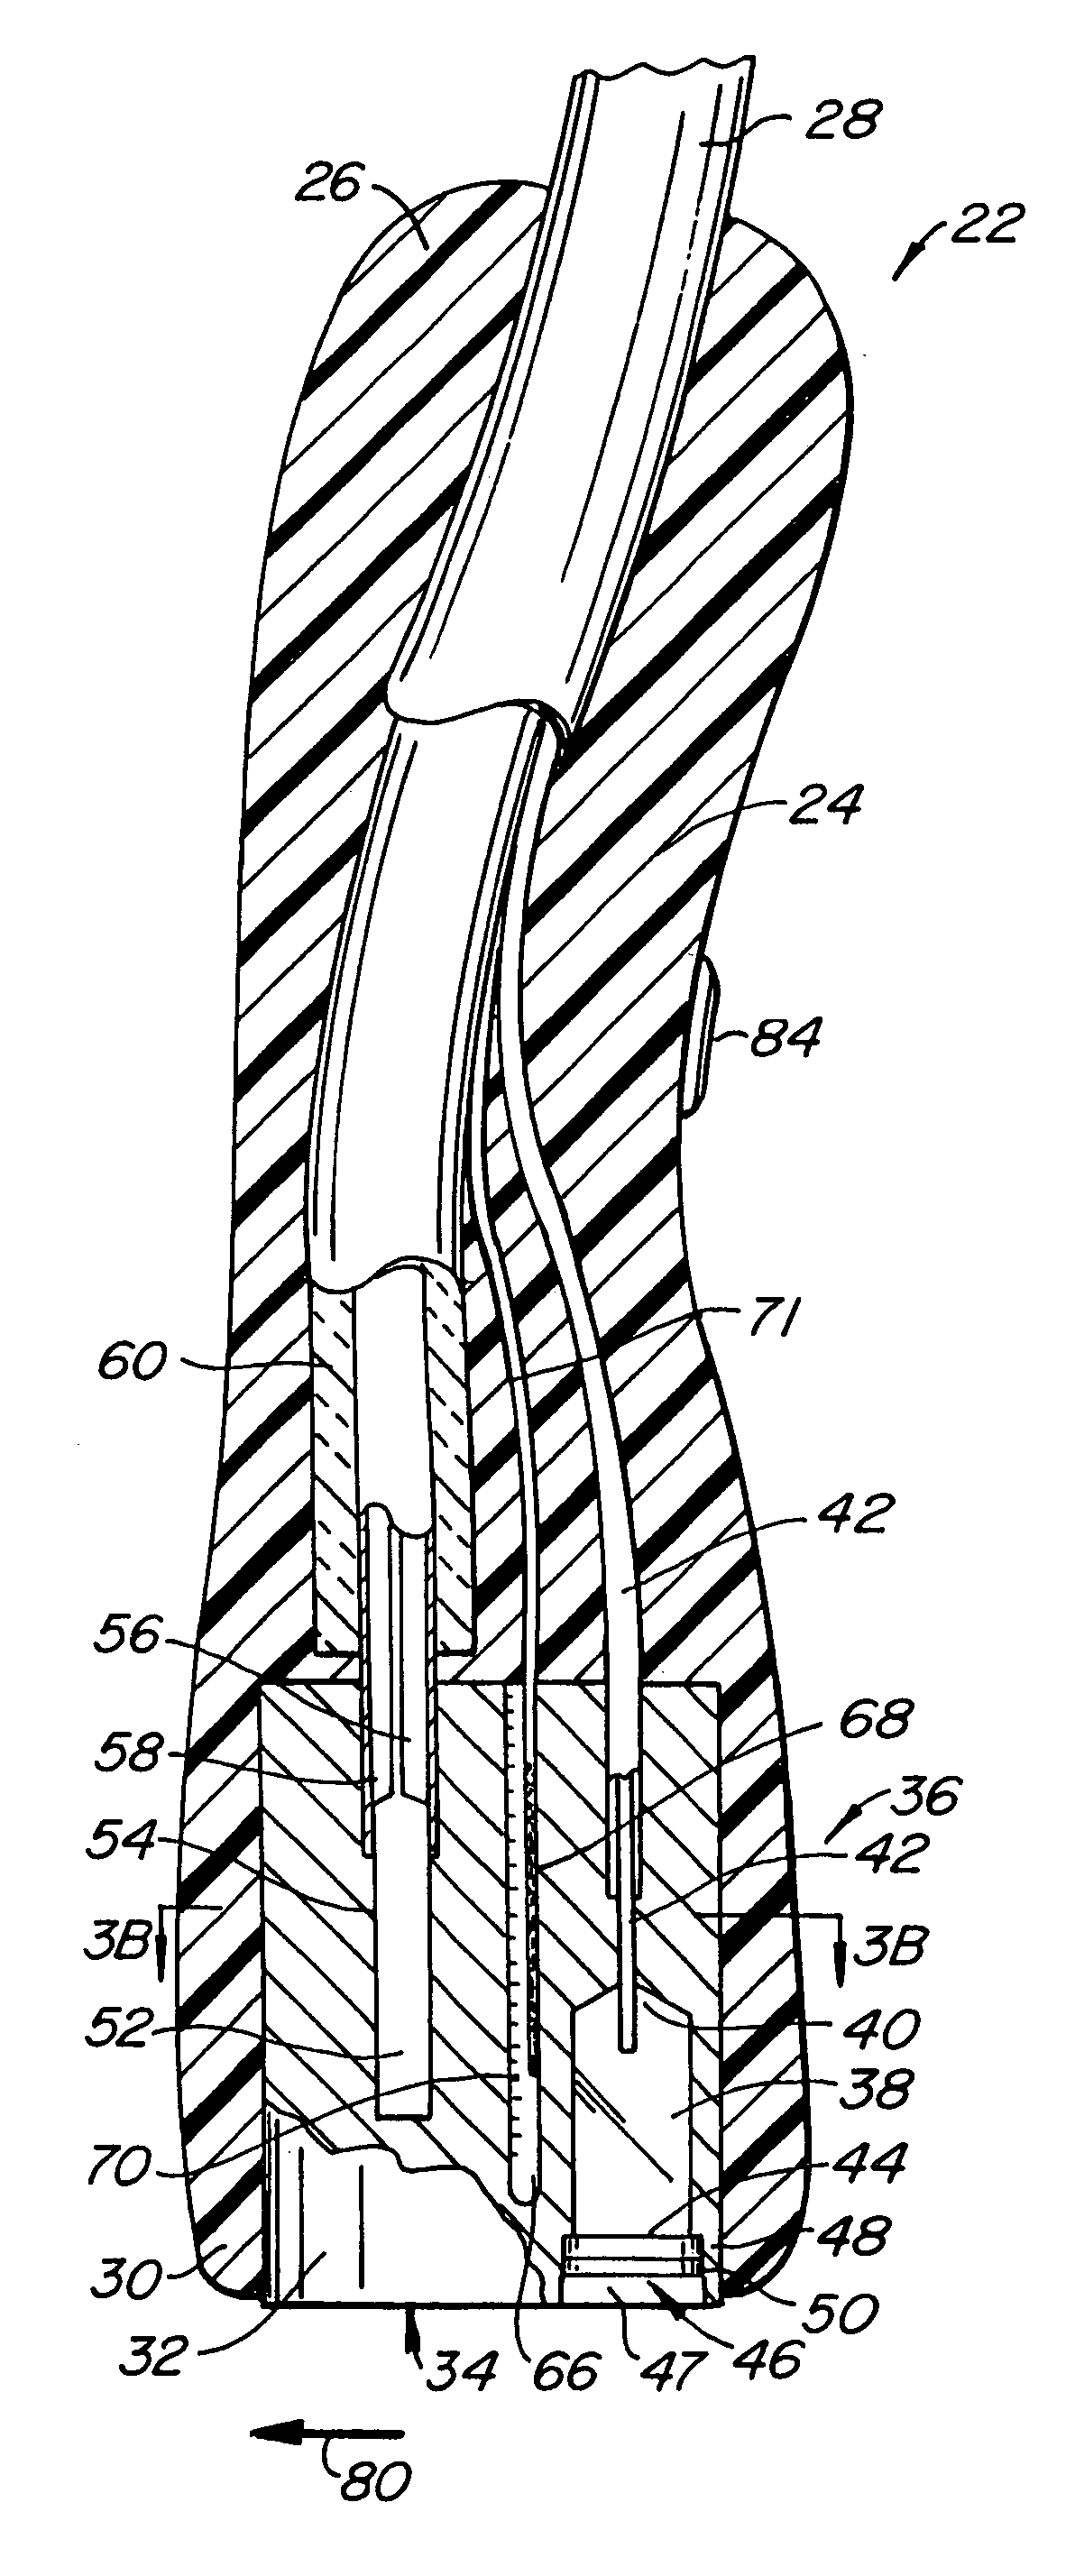 Tissue treatment device and method